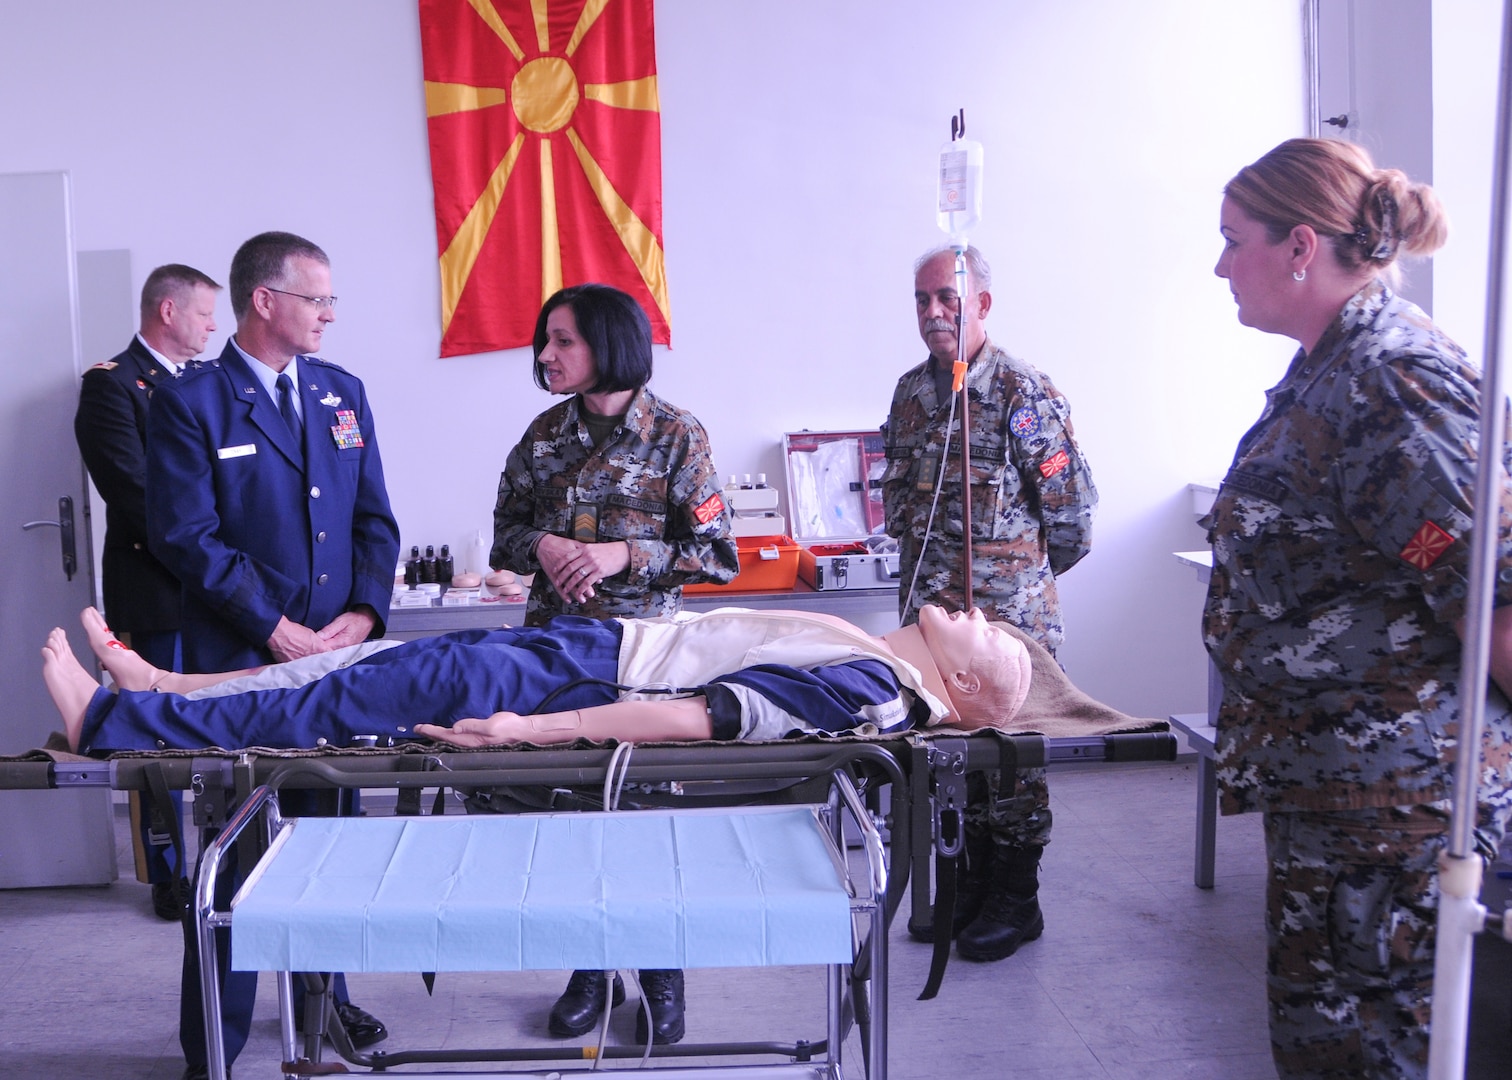 Maj. Gen. Steven Cray is briefed at the Army Medical Training Center in Skopje, North Macedonia, by soldiers of the Army of the Republic of Macedonia. Macedonia's Army Medical Unit has Role 2 capabilities and will likely become the focus of the tri-lateral engagement between Senegal and Macedonia, Vermont's two State Partnership Program Countries, Sept. 22, 2014. (U.S. Air National Guard photo by Capt. Dyana Allen)